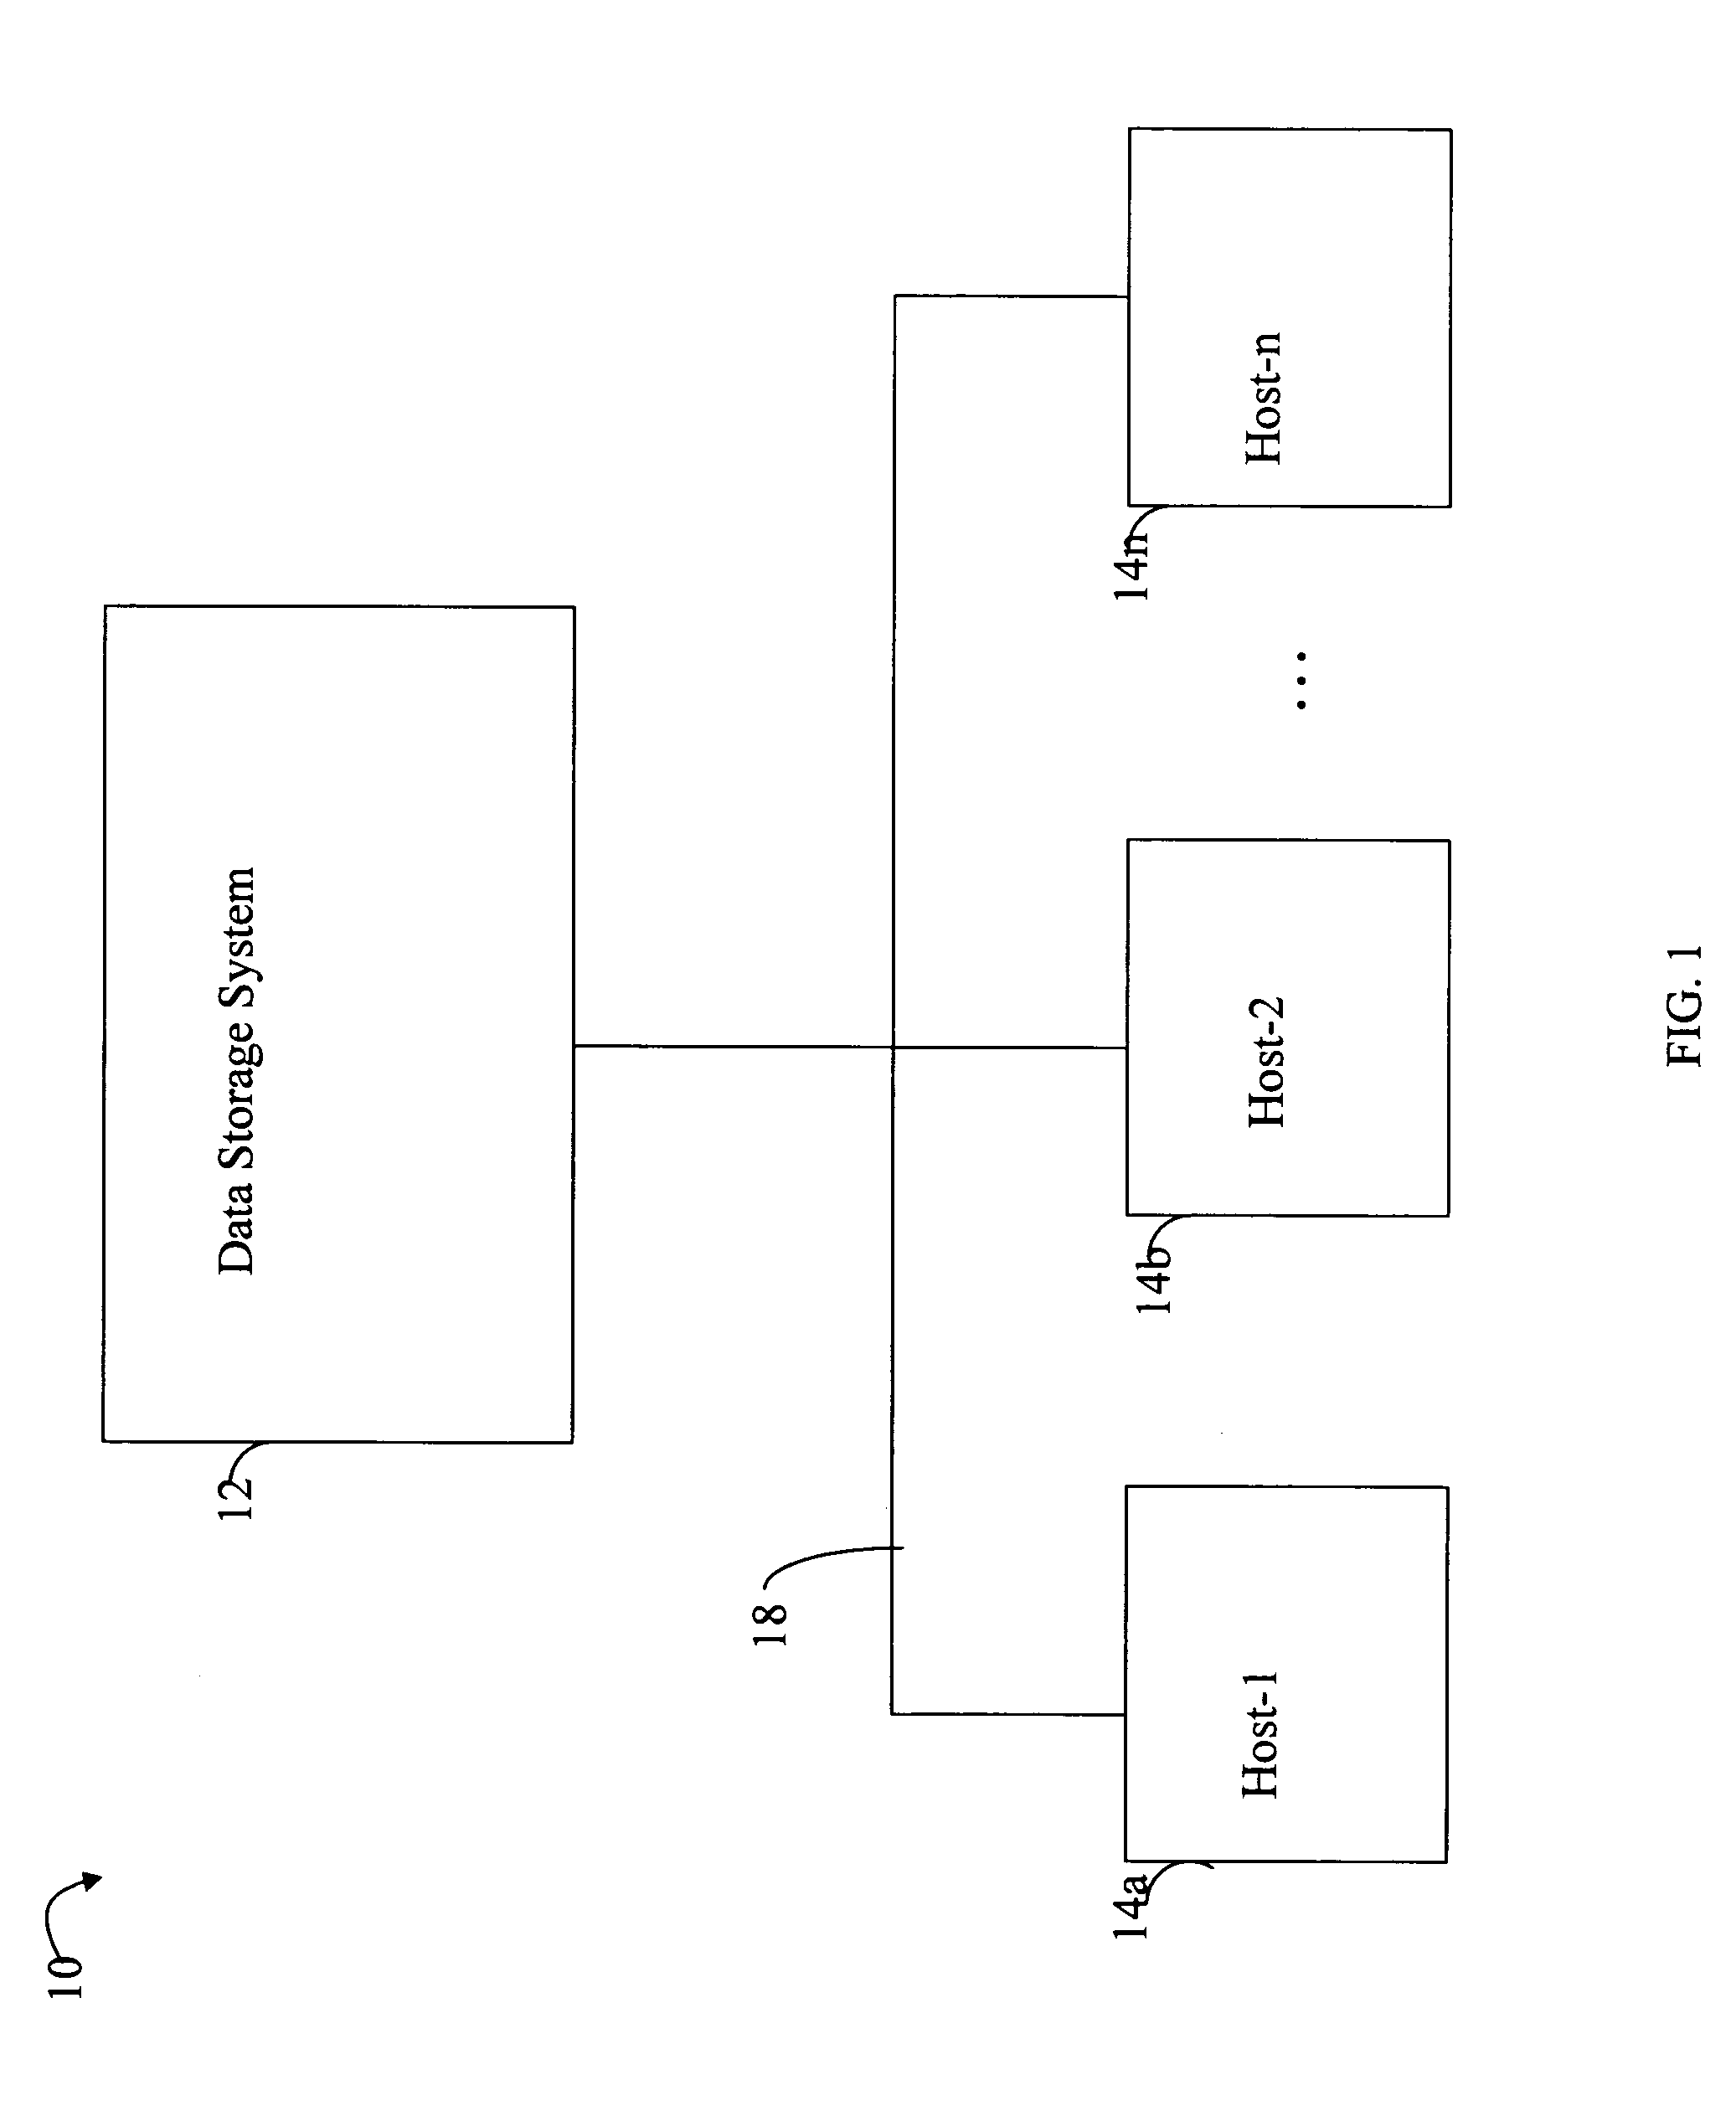 Techniques for management of information regarding a sequential stream